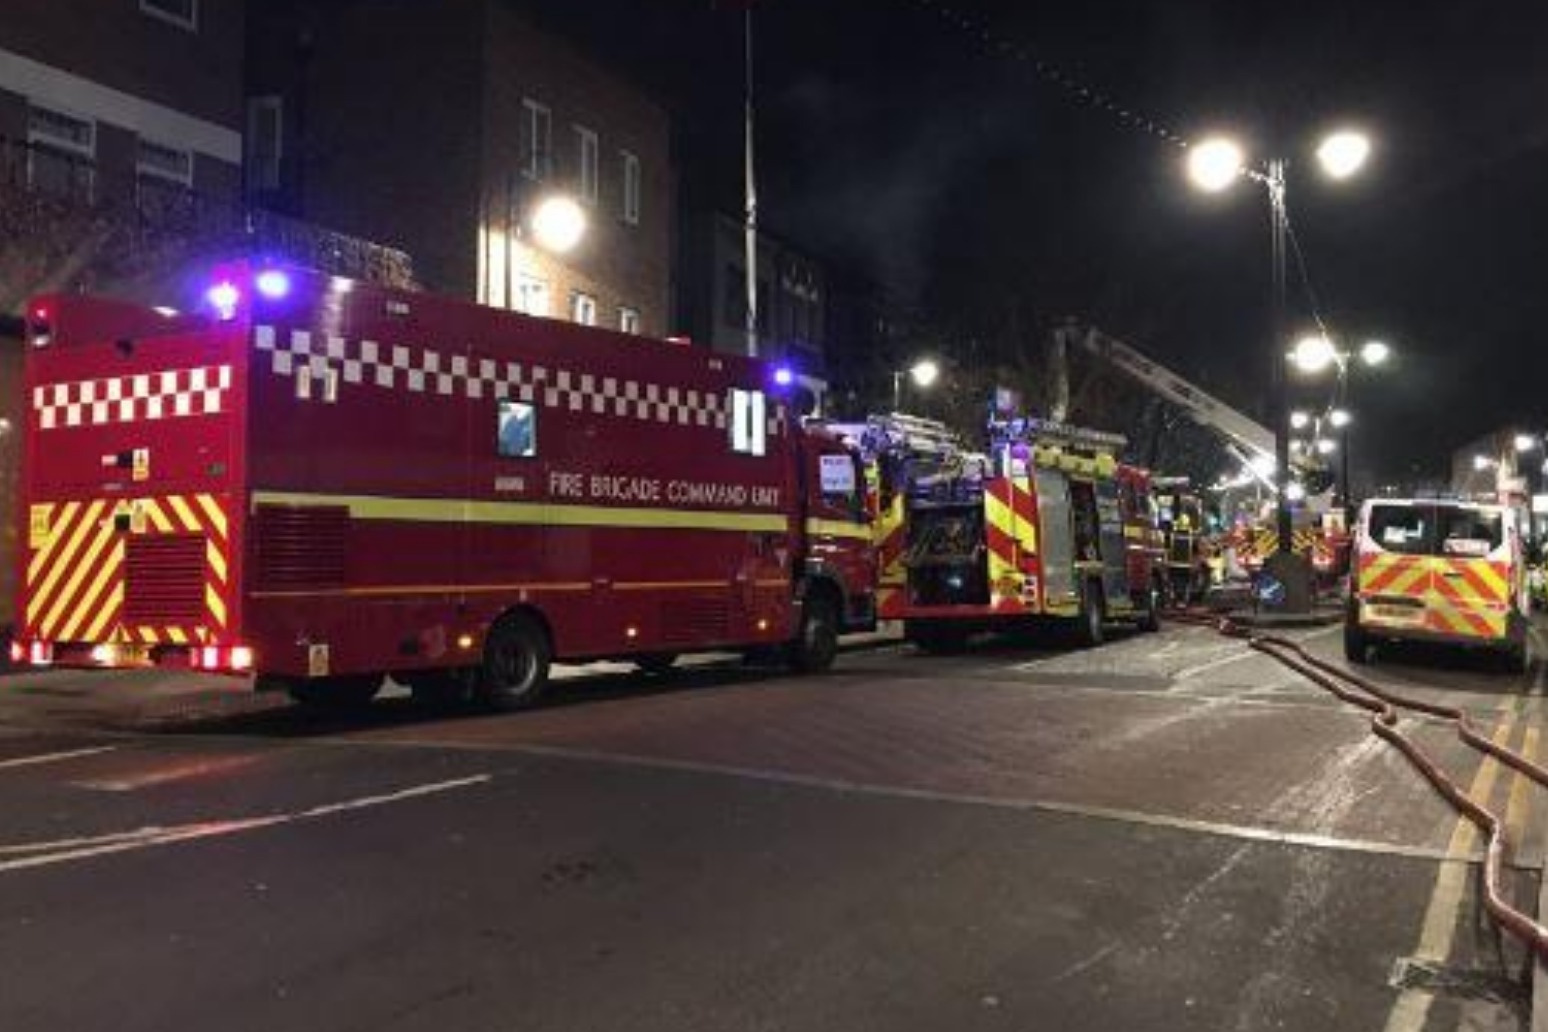 Woman dies in London care home fire 